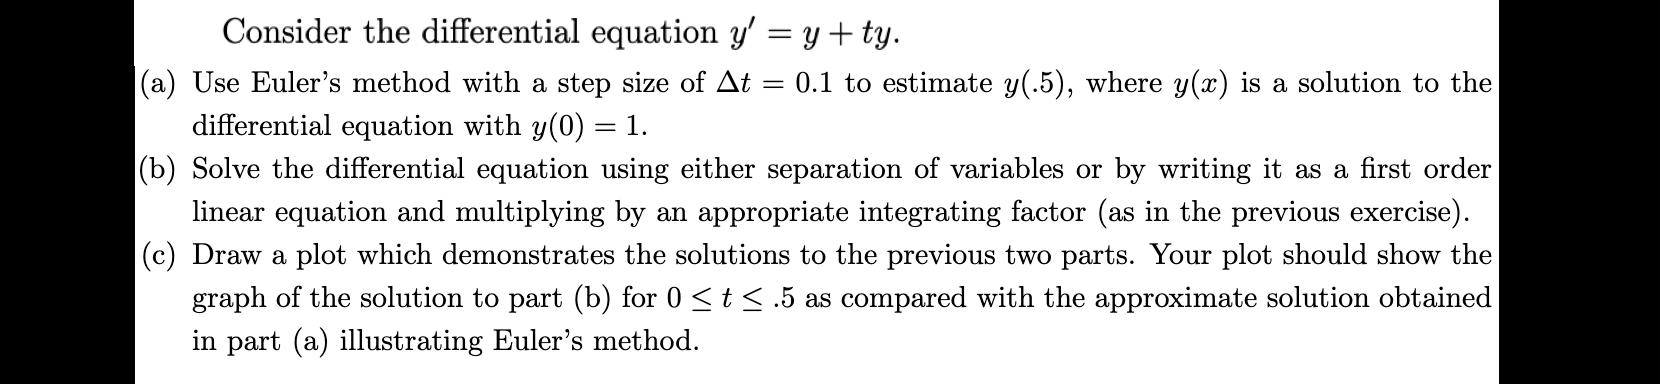 Consider the differential equation y' = y + ty. (a) Use Euler's method with a step size of At 0.1 to estimate